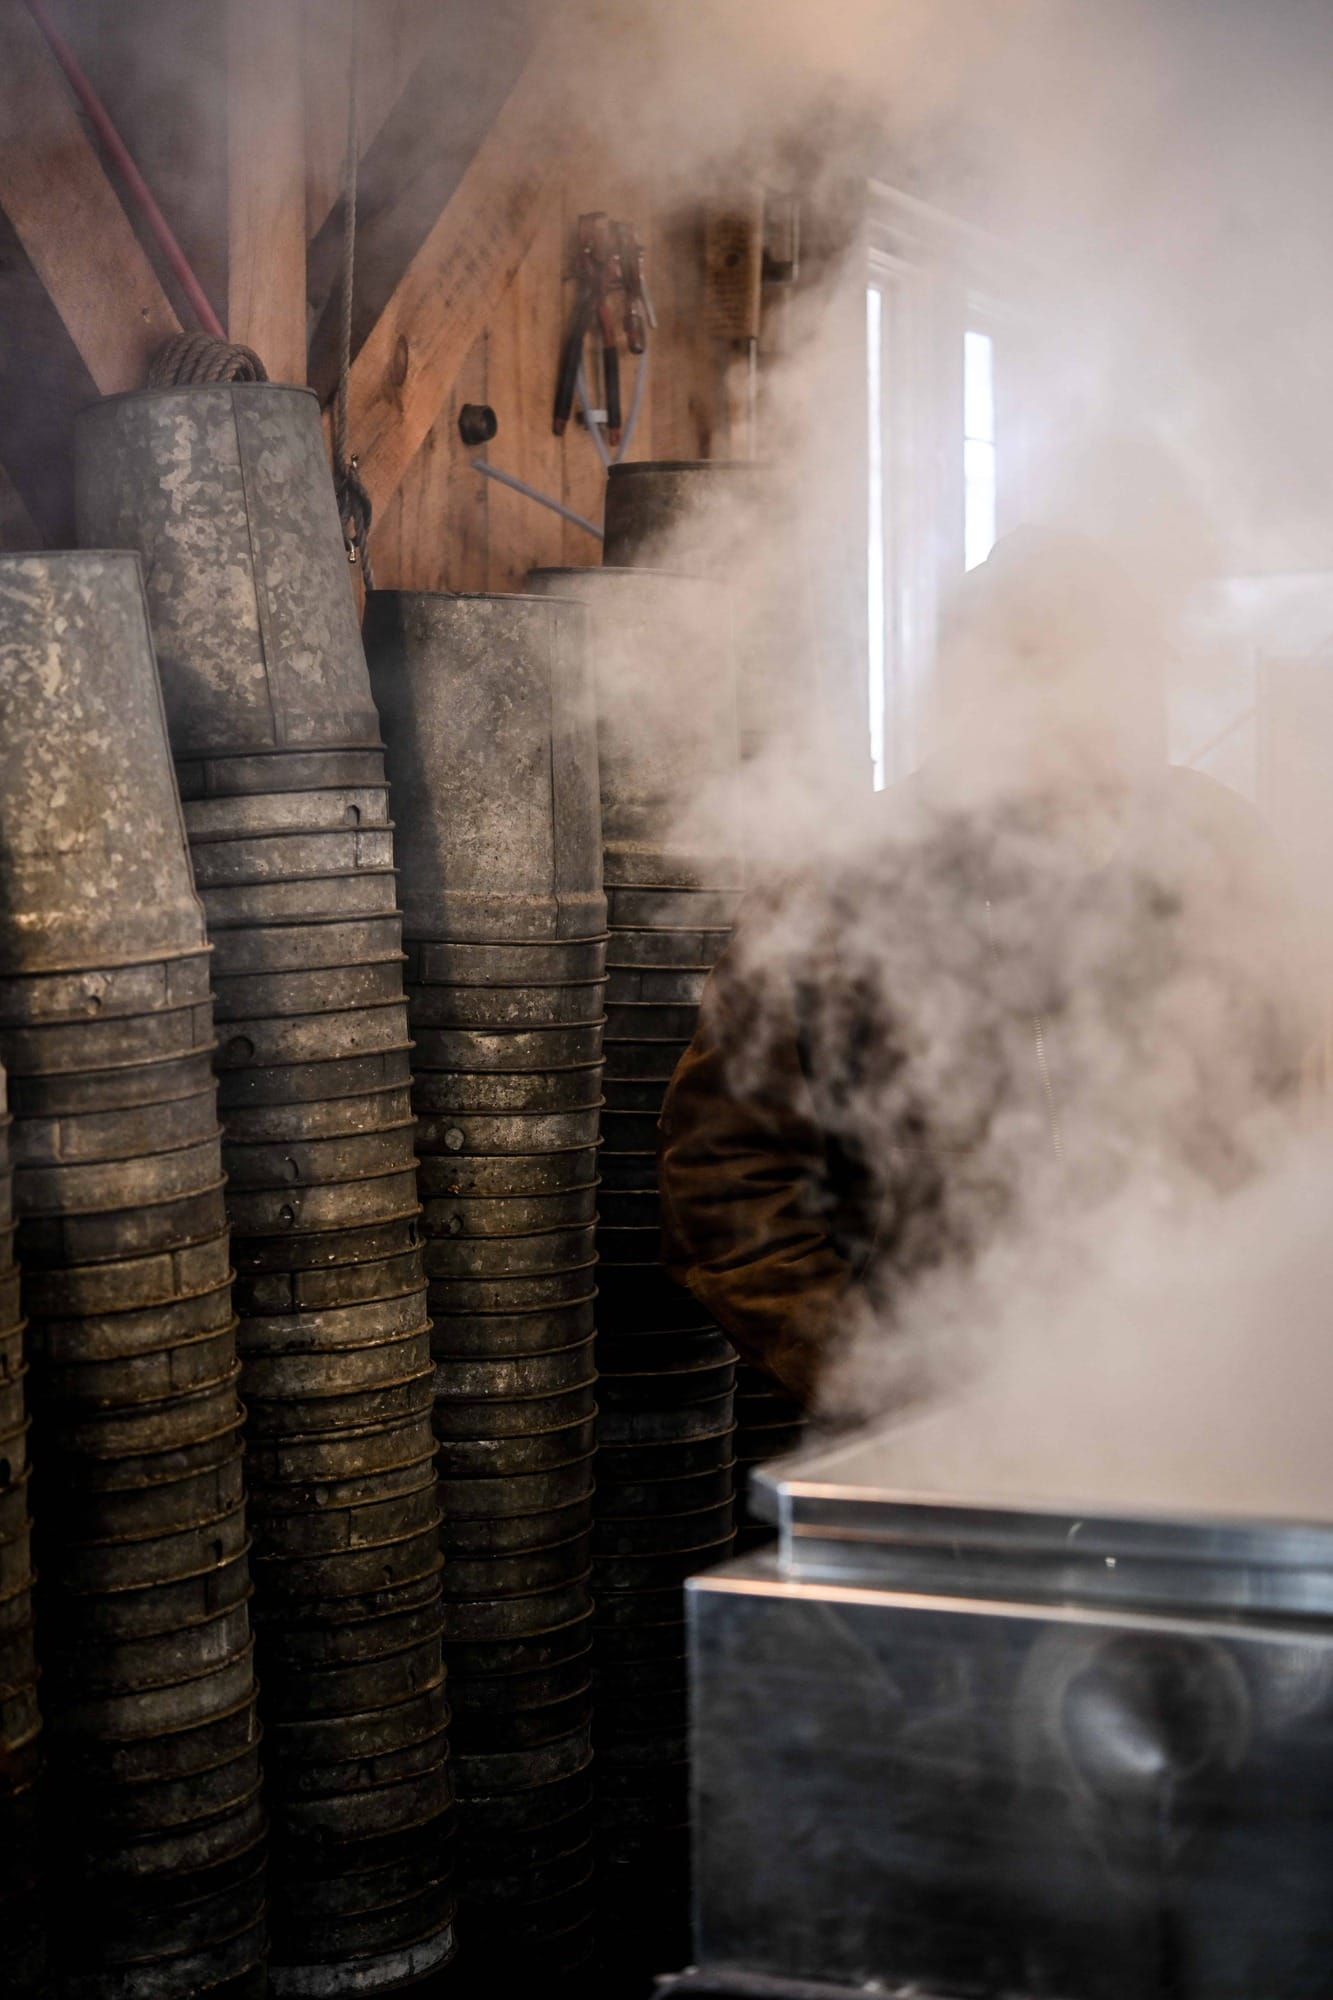 View of maple sap collection buckets in Sugarhouse with steam in foreground